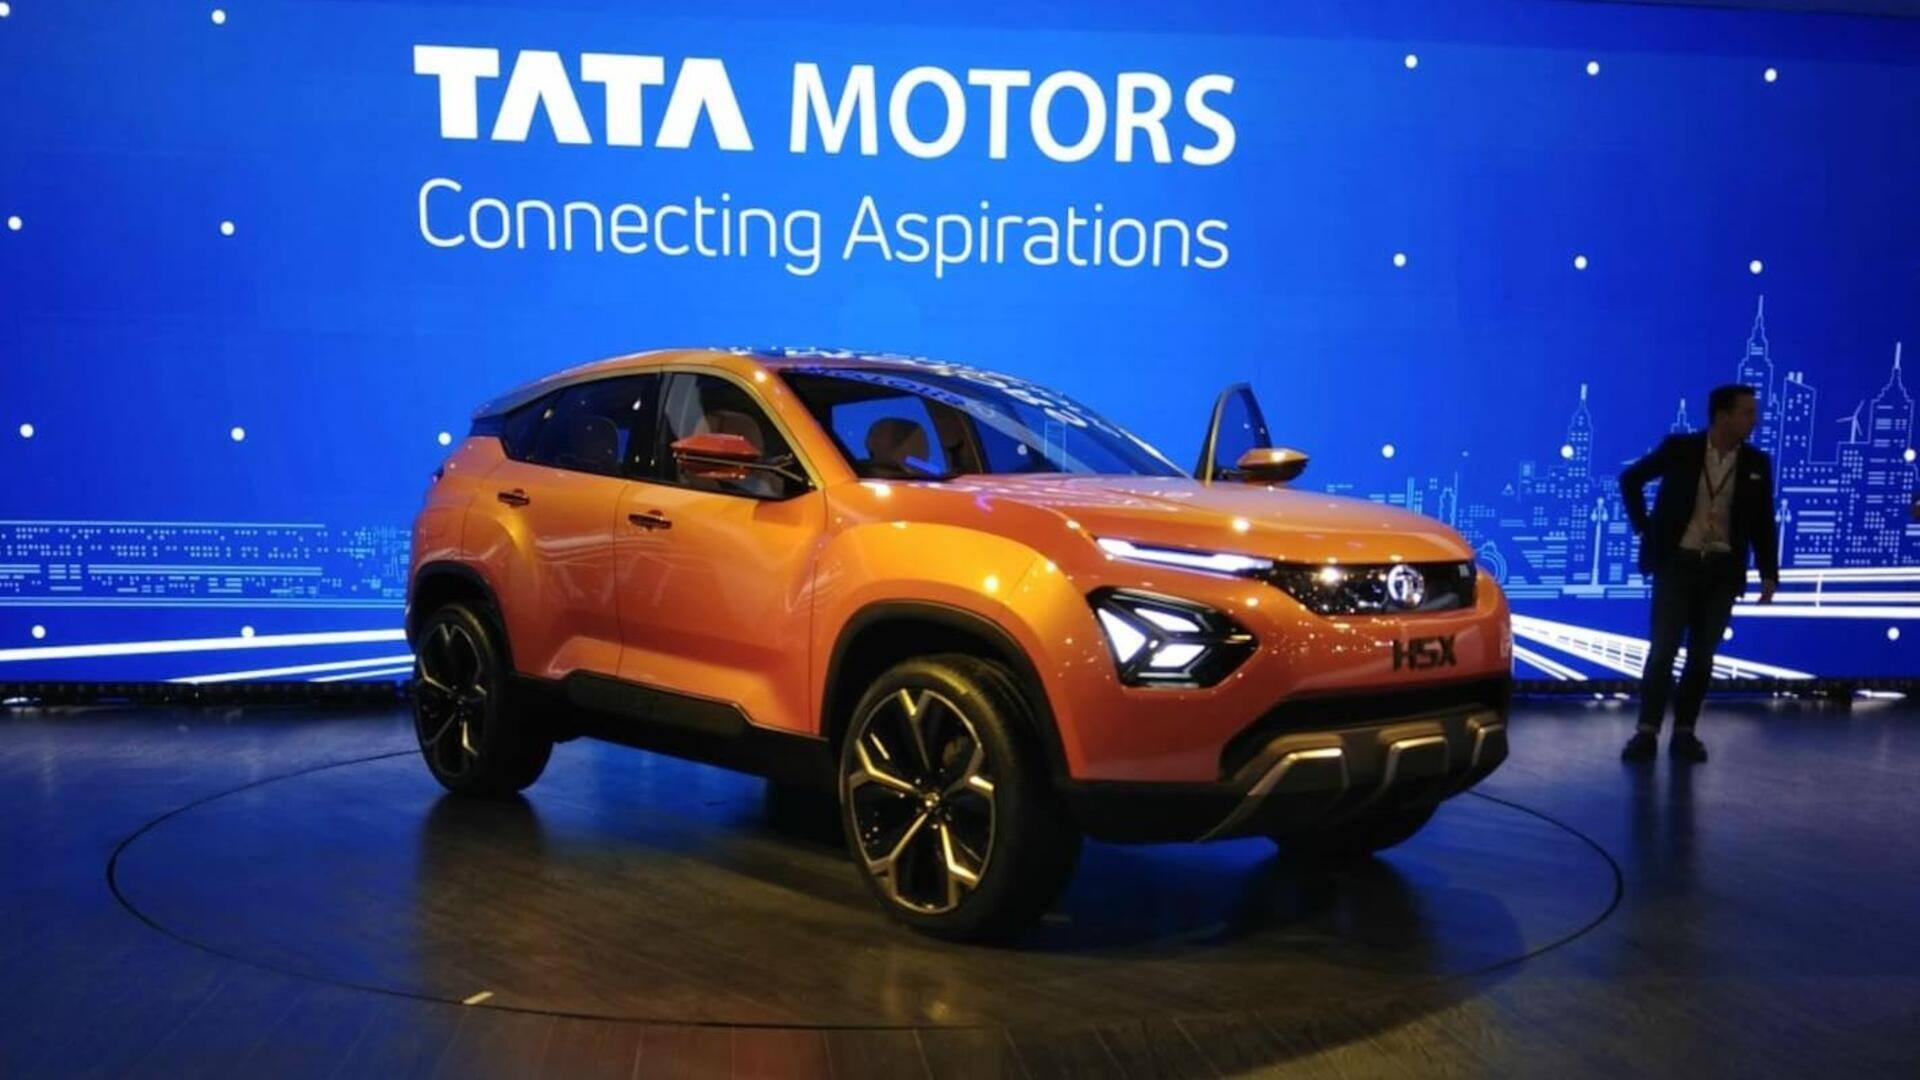 Tata Motors shares hit record high: What's fueling rally